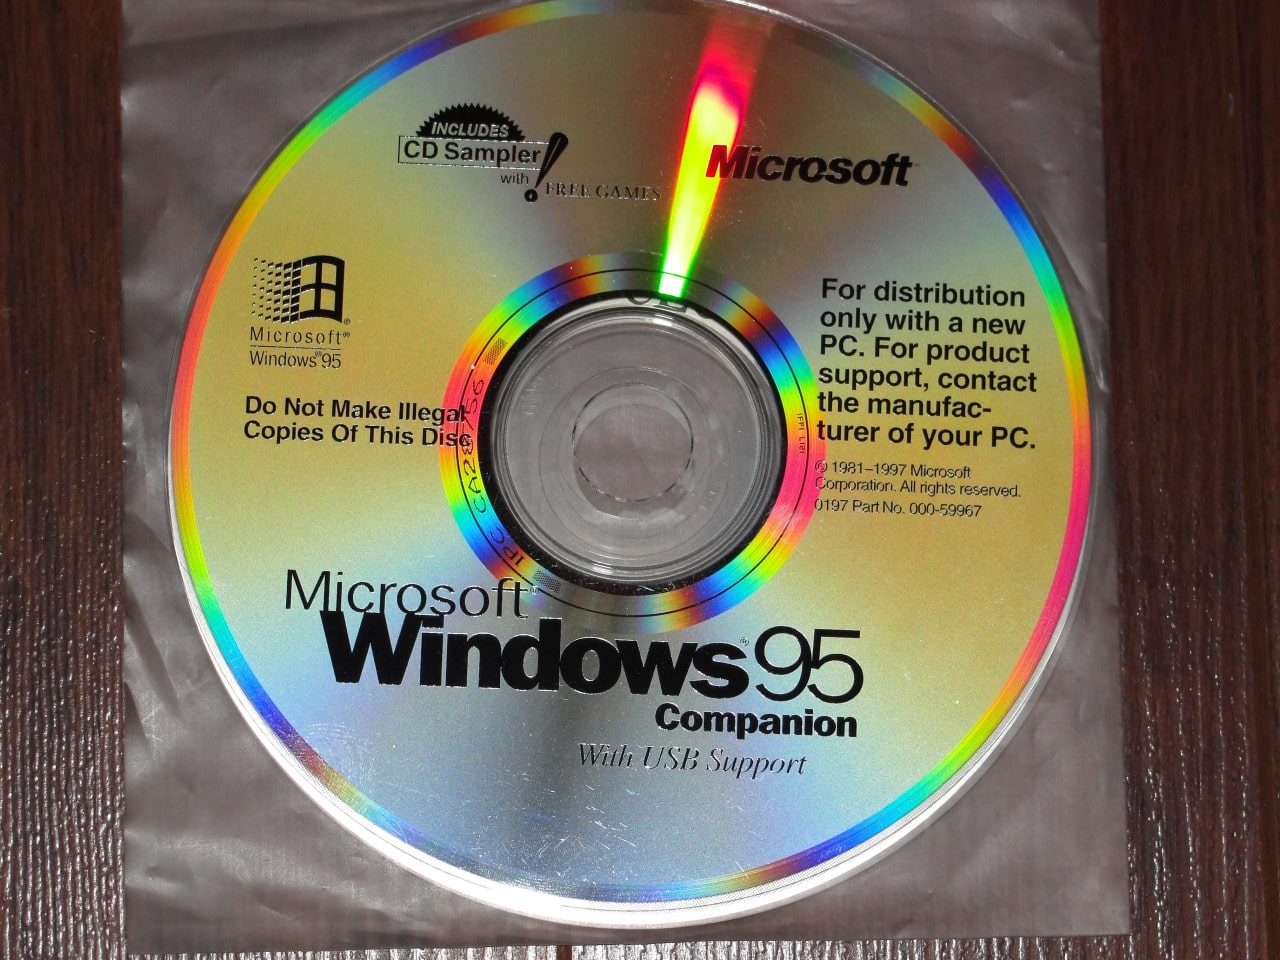 How To Install Windows 95 From Cd